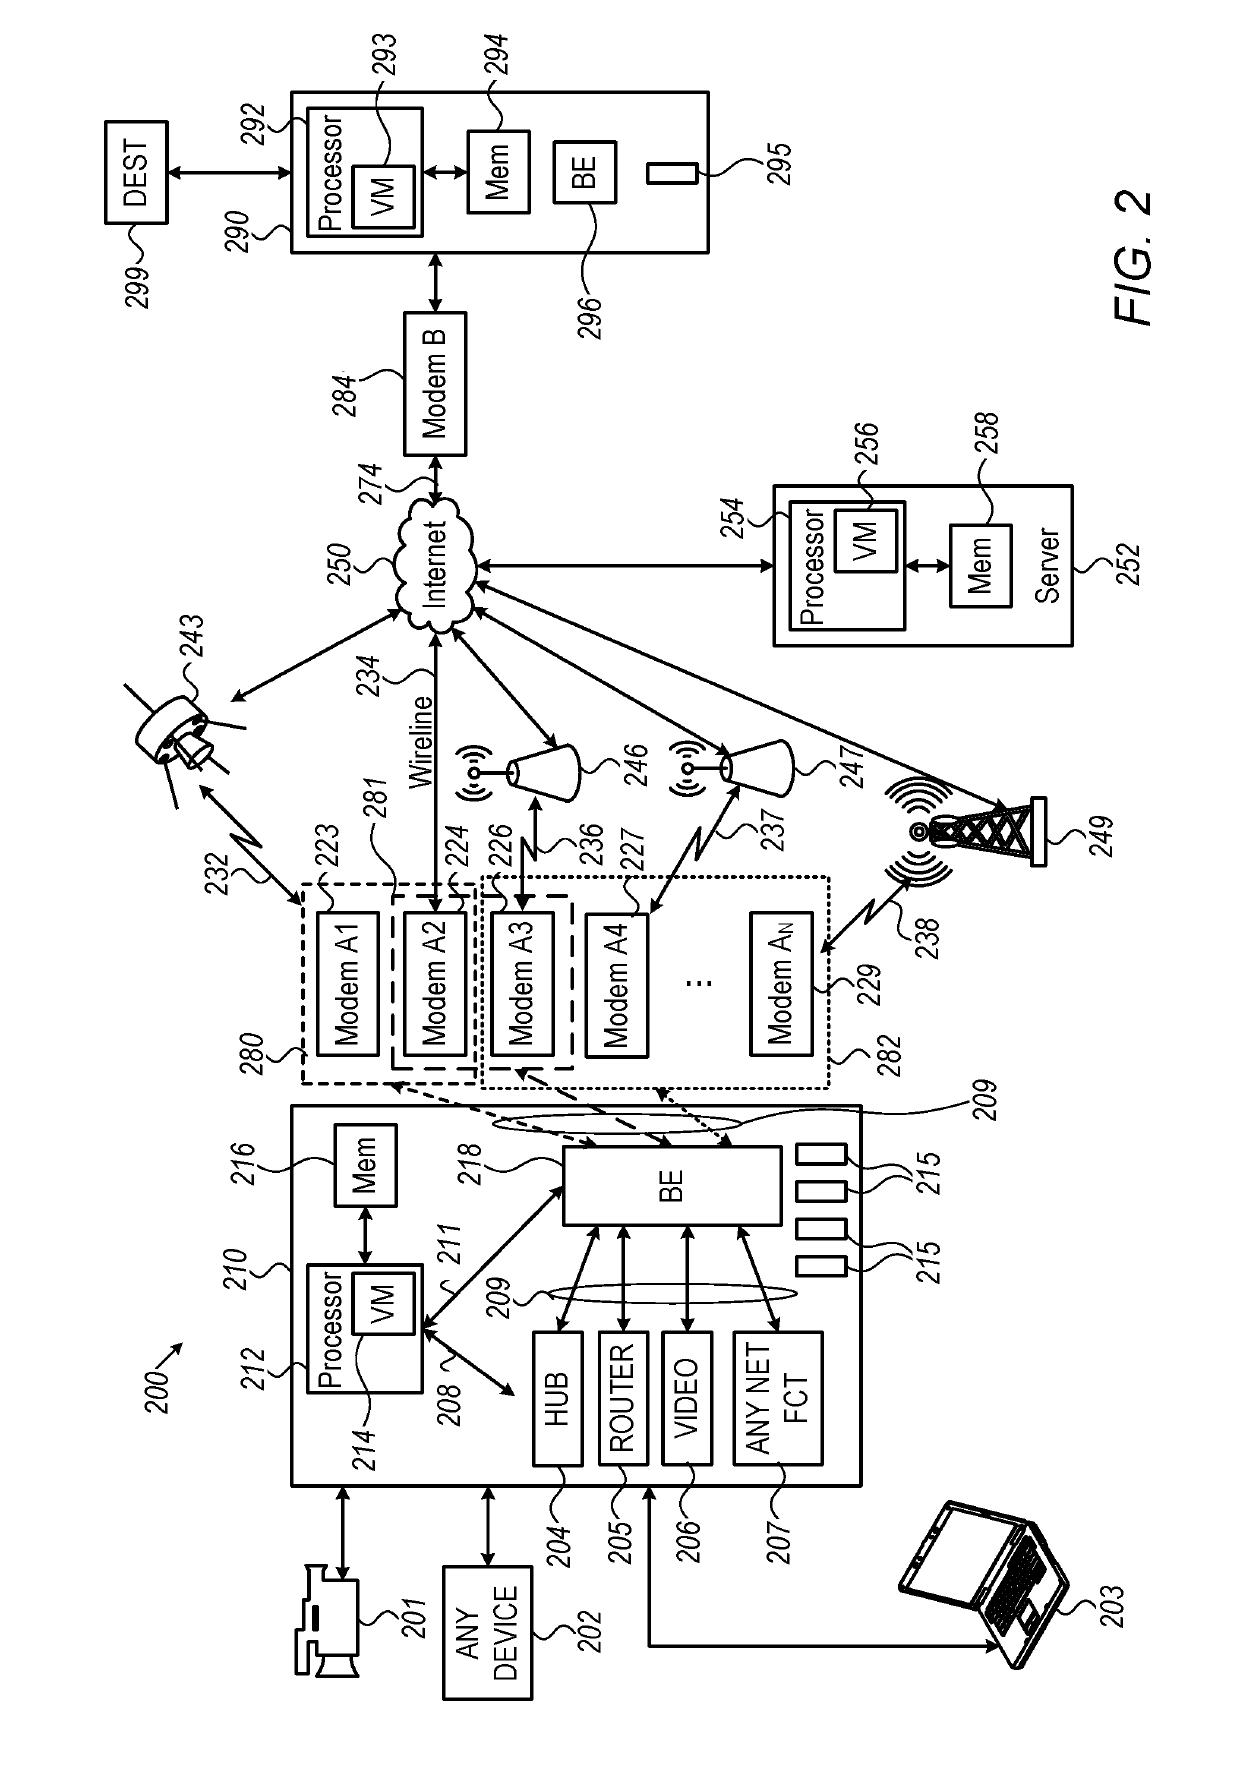 Methods and systems for managing bonded communications across multiple communication networks